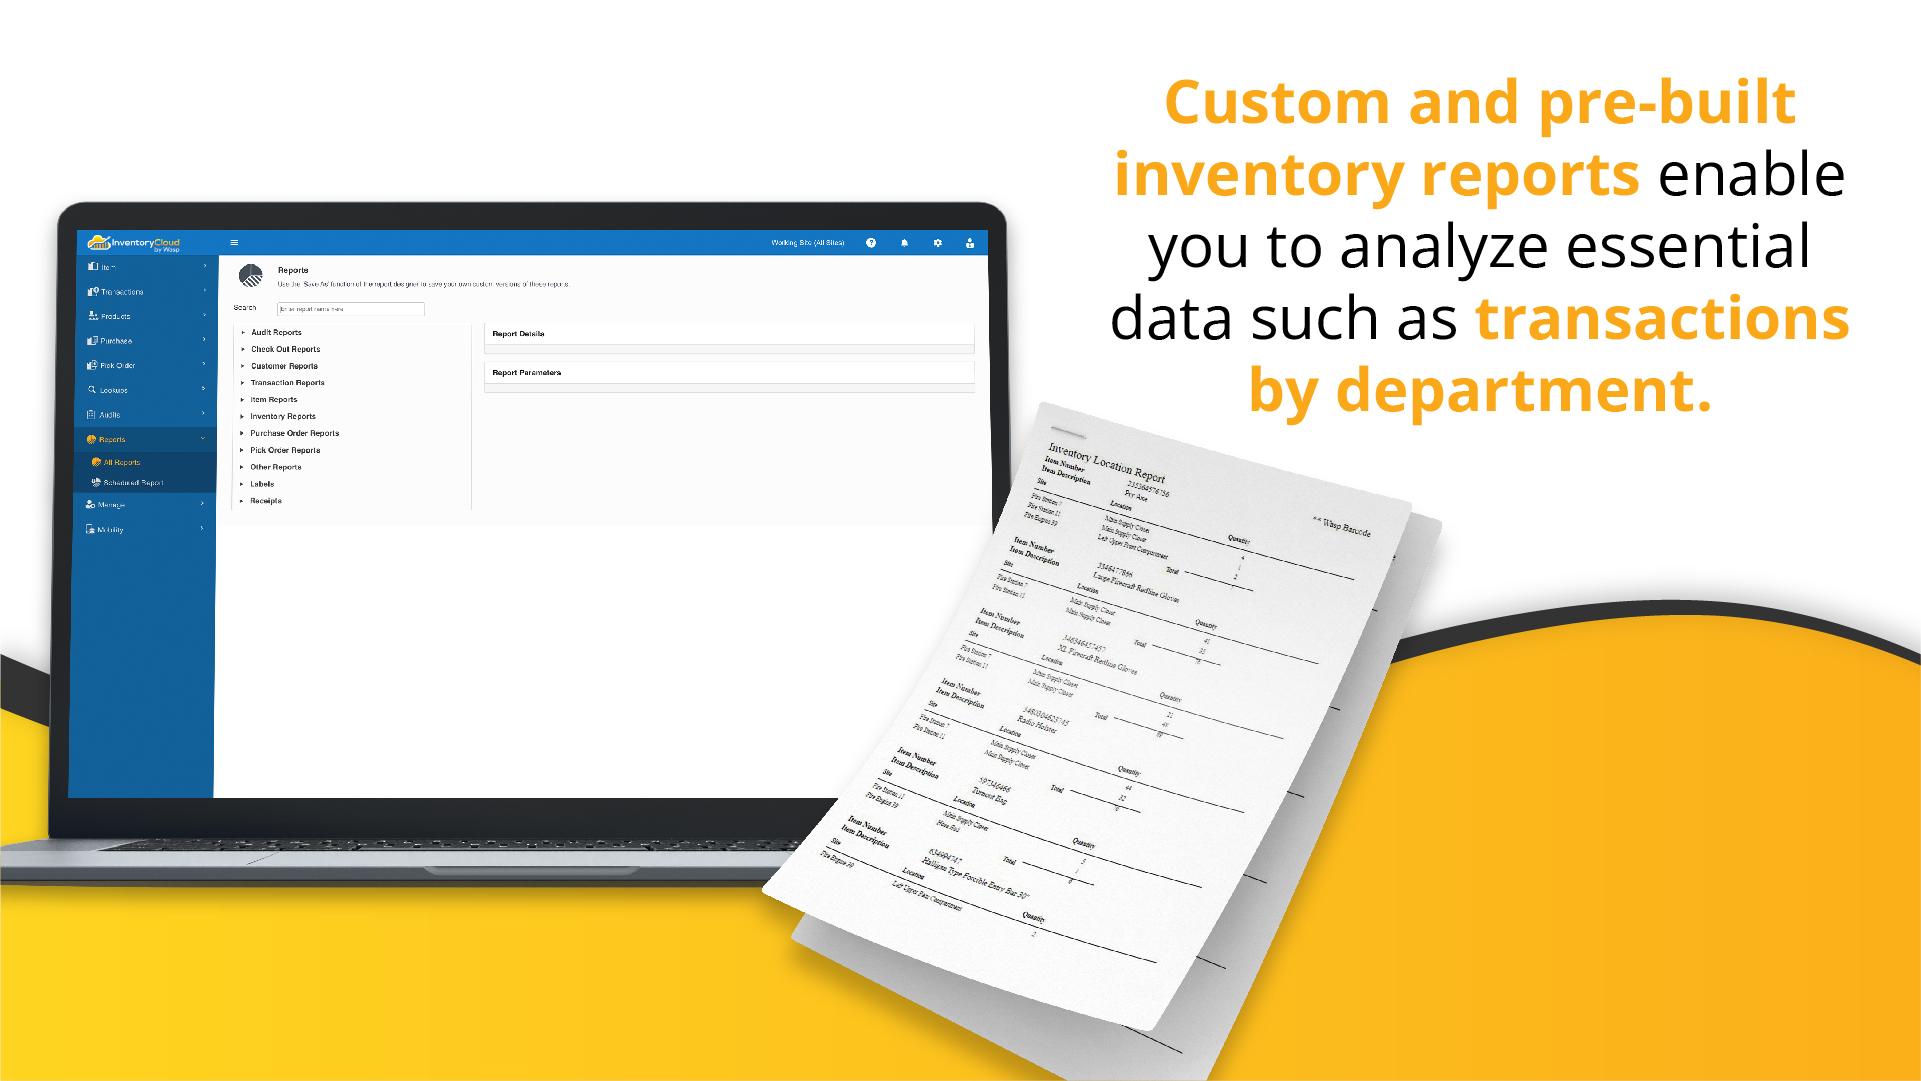 Custom and pre-built inventory reports enable you to analyze essential data such as transactions by department